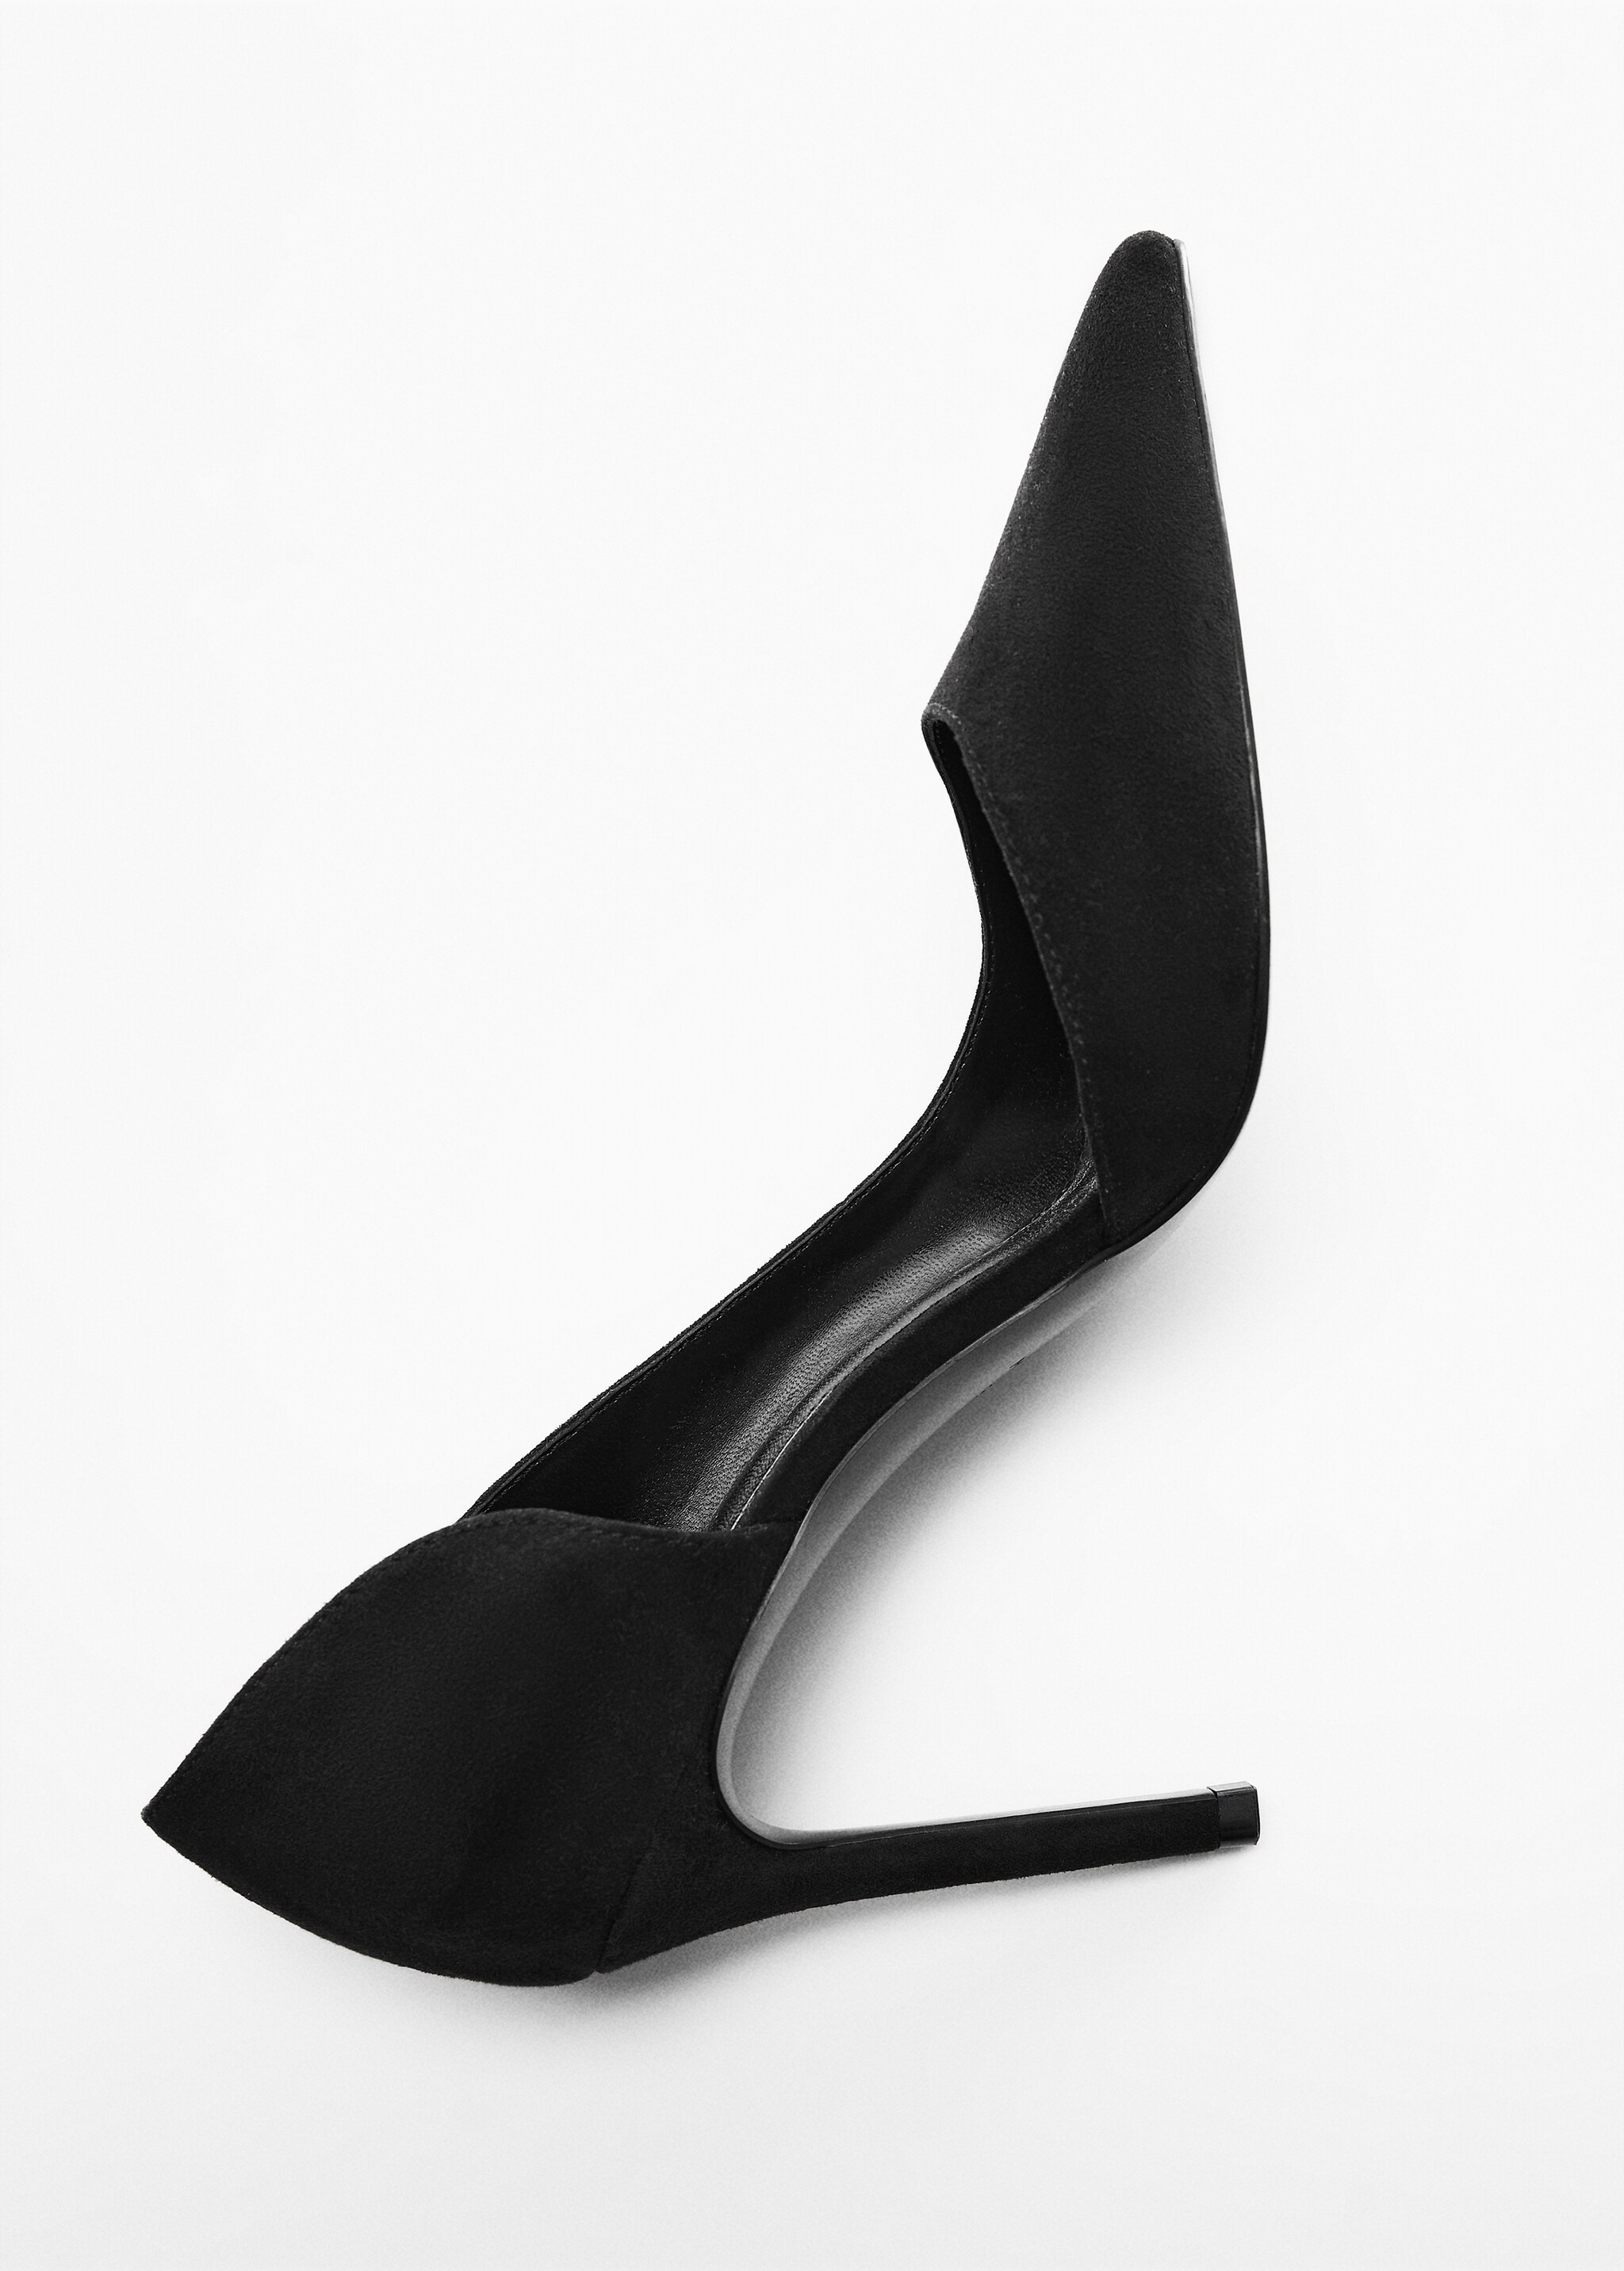 Asymmetrical heeled shoes - Details of the article 5